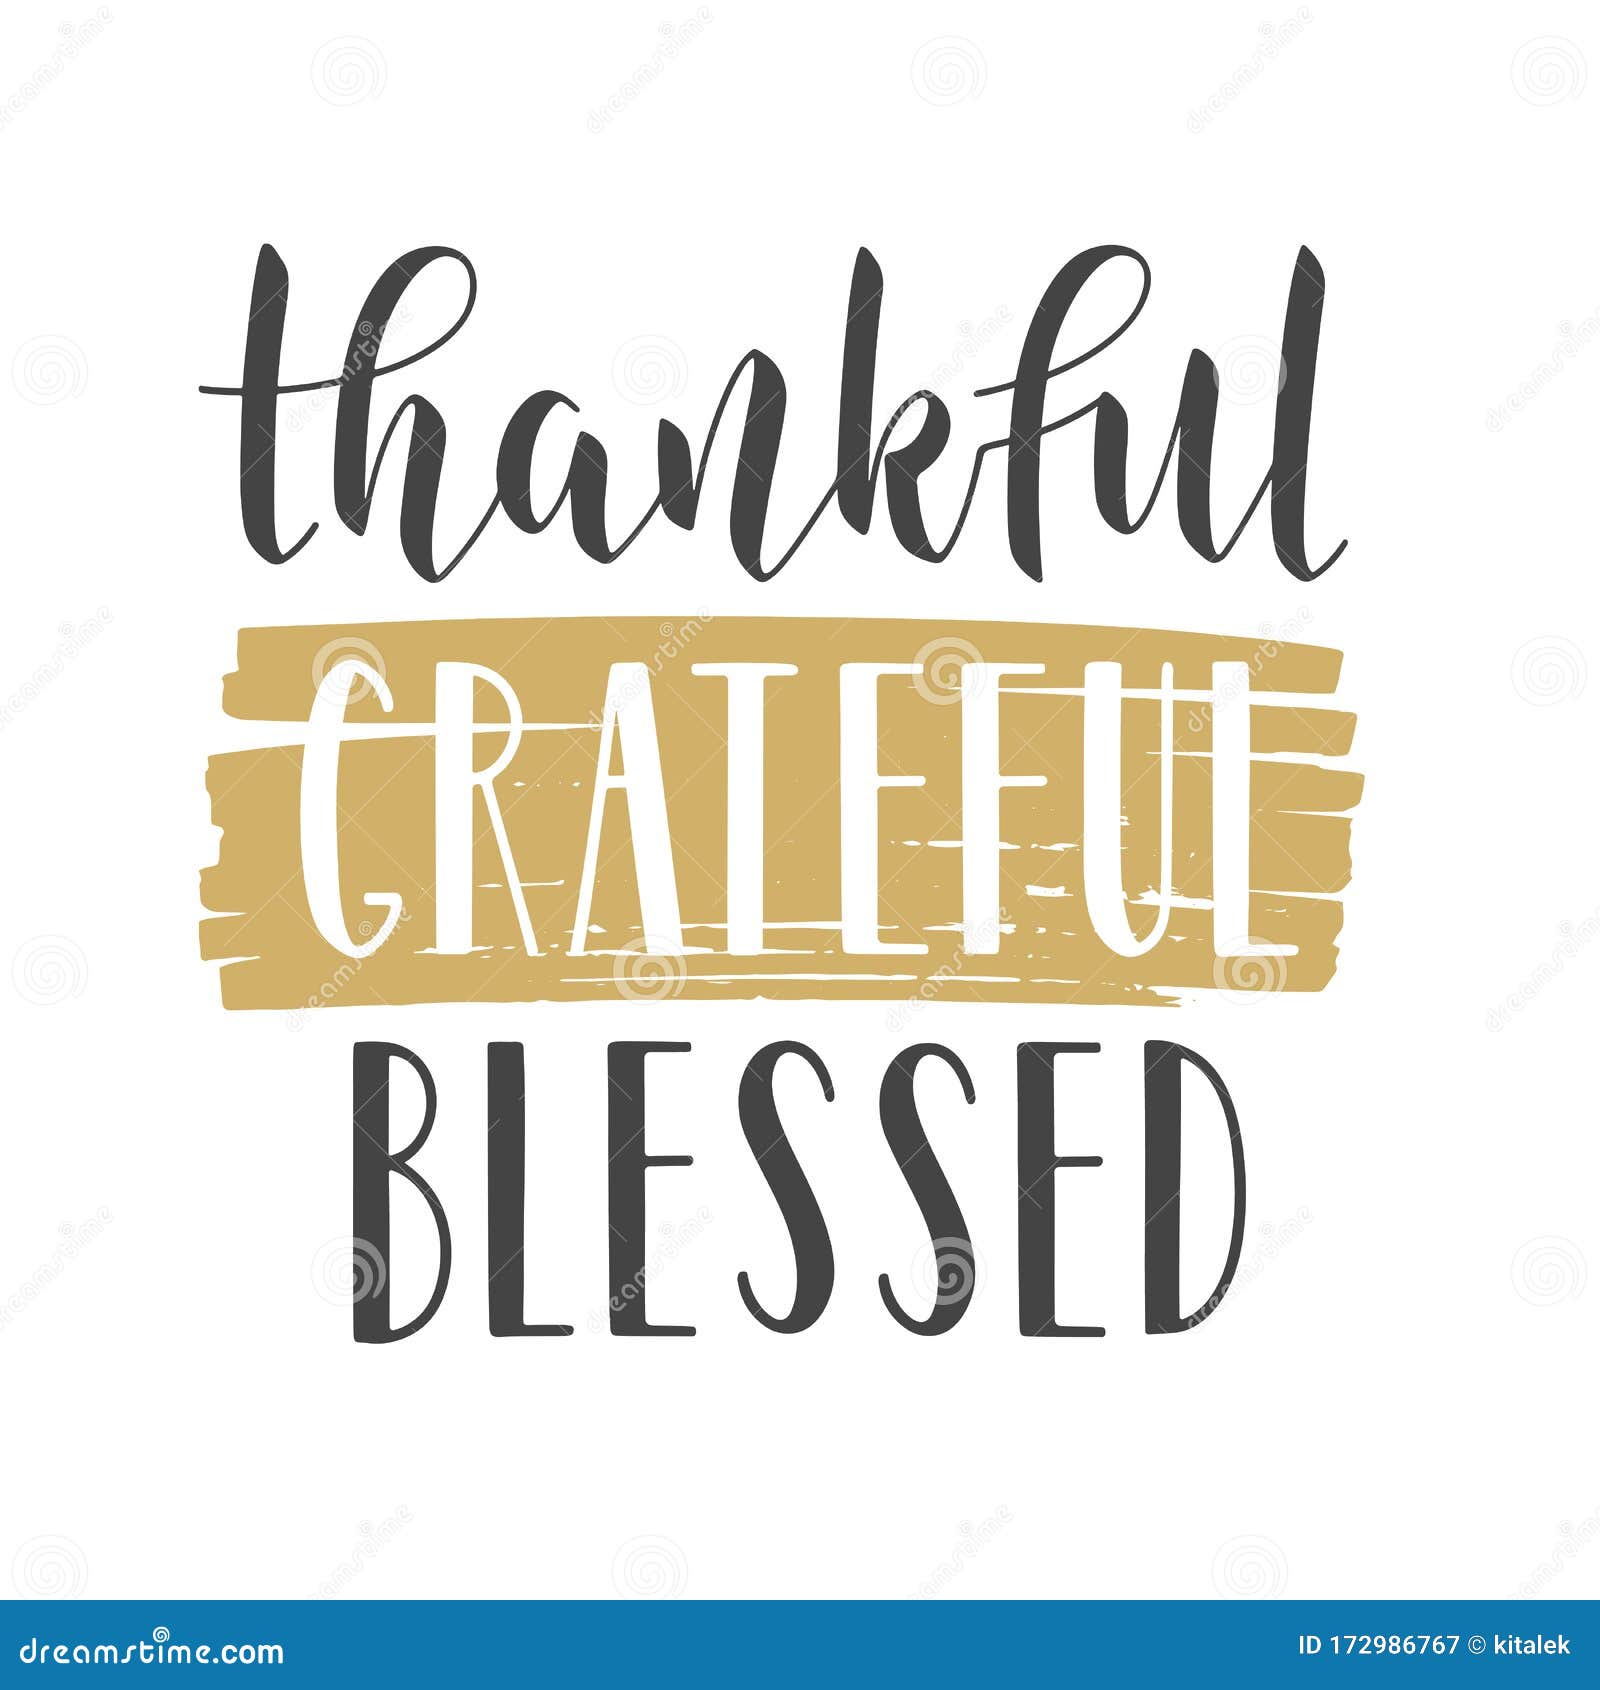 Download Handwritten Lettering Of Thankful, Grateful, Blessed ...